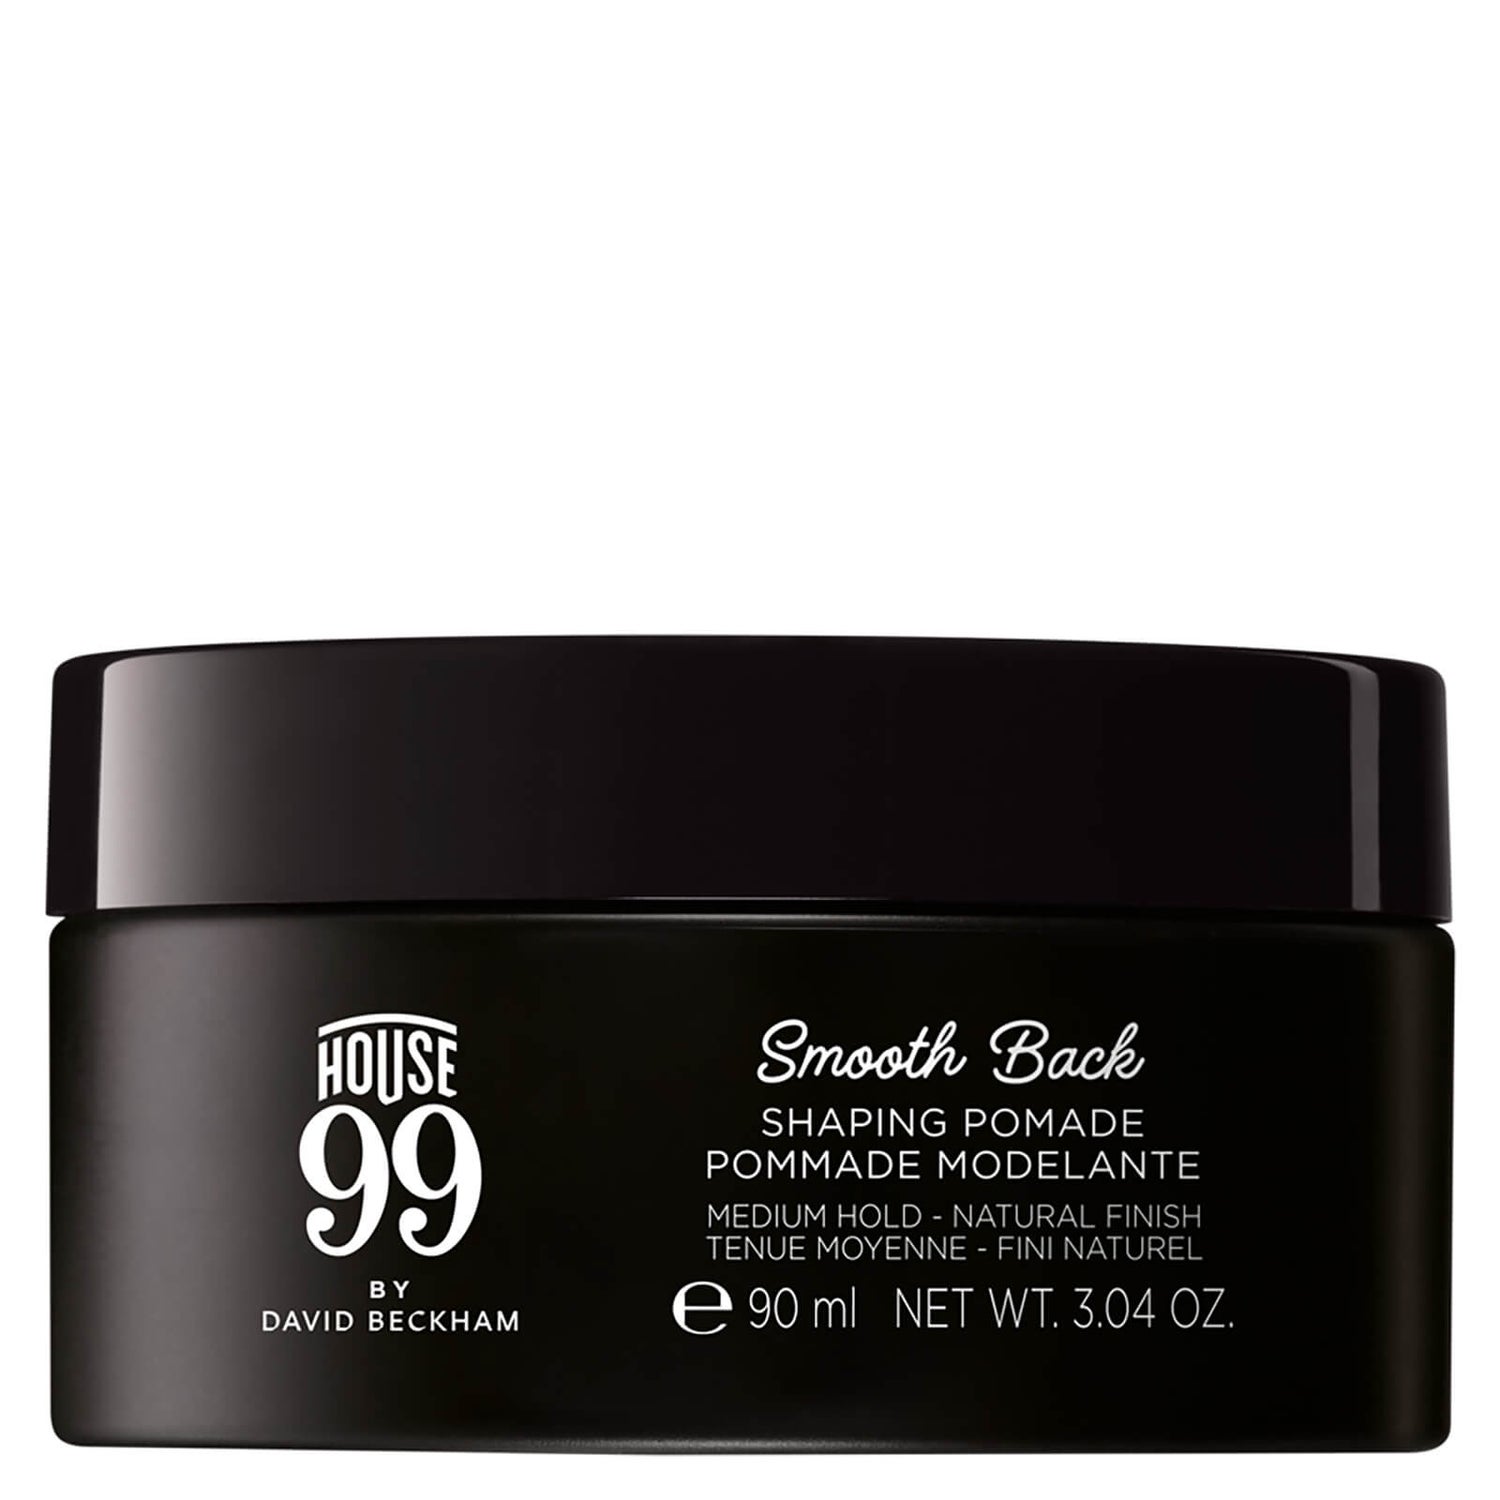 House 99 Smooth Back Shaping Pomade 90ml